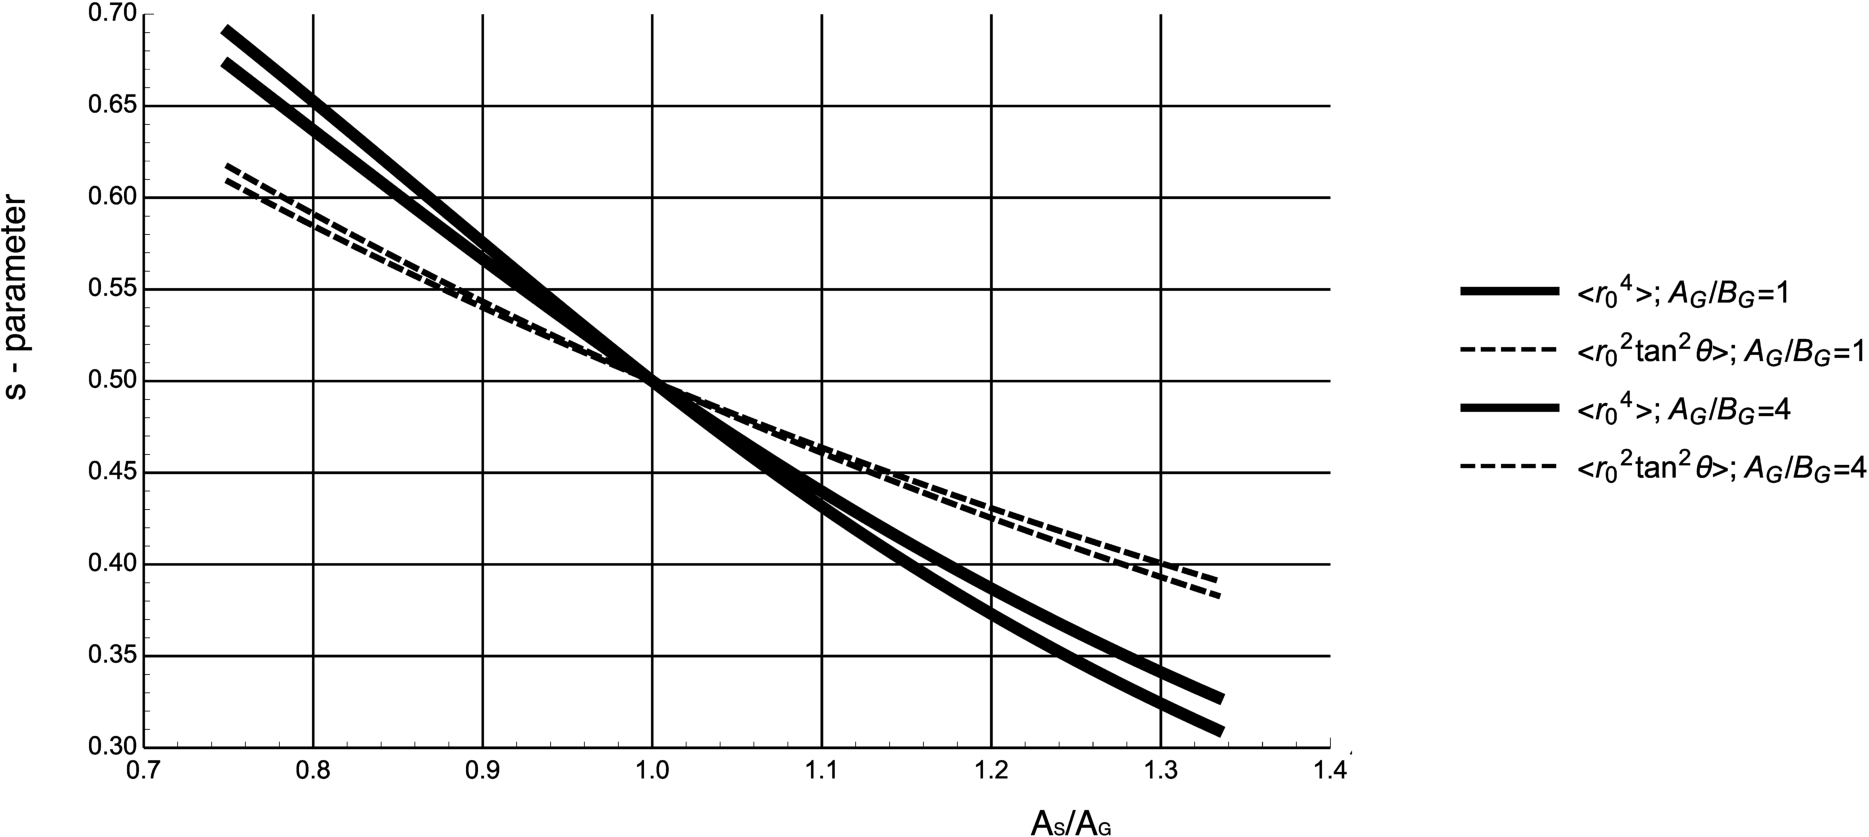 Optimal s-parameter obtained by minimising the beam averages, ⟨r04⟩ and ⟨r02tan2θ⟩. The aspect ratio of the guide exit is AG/BG, and is equal to that of the sample, i.e. AS/AG=BS/BG.